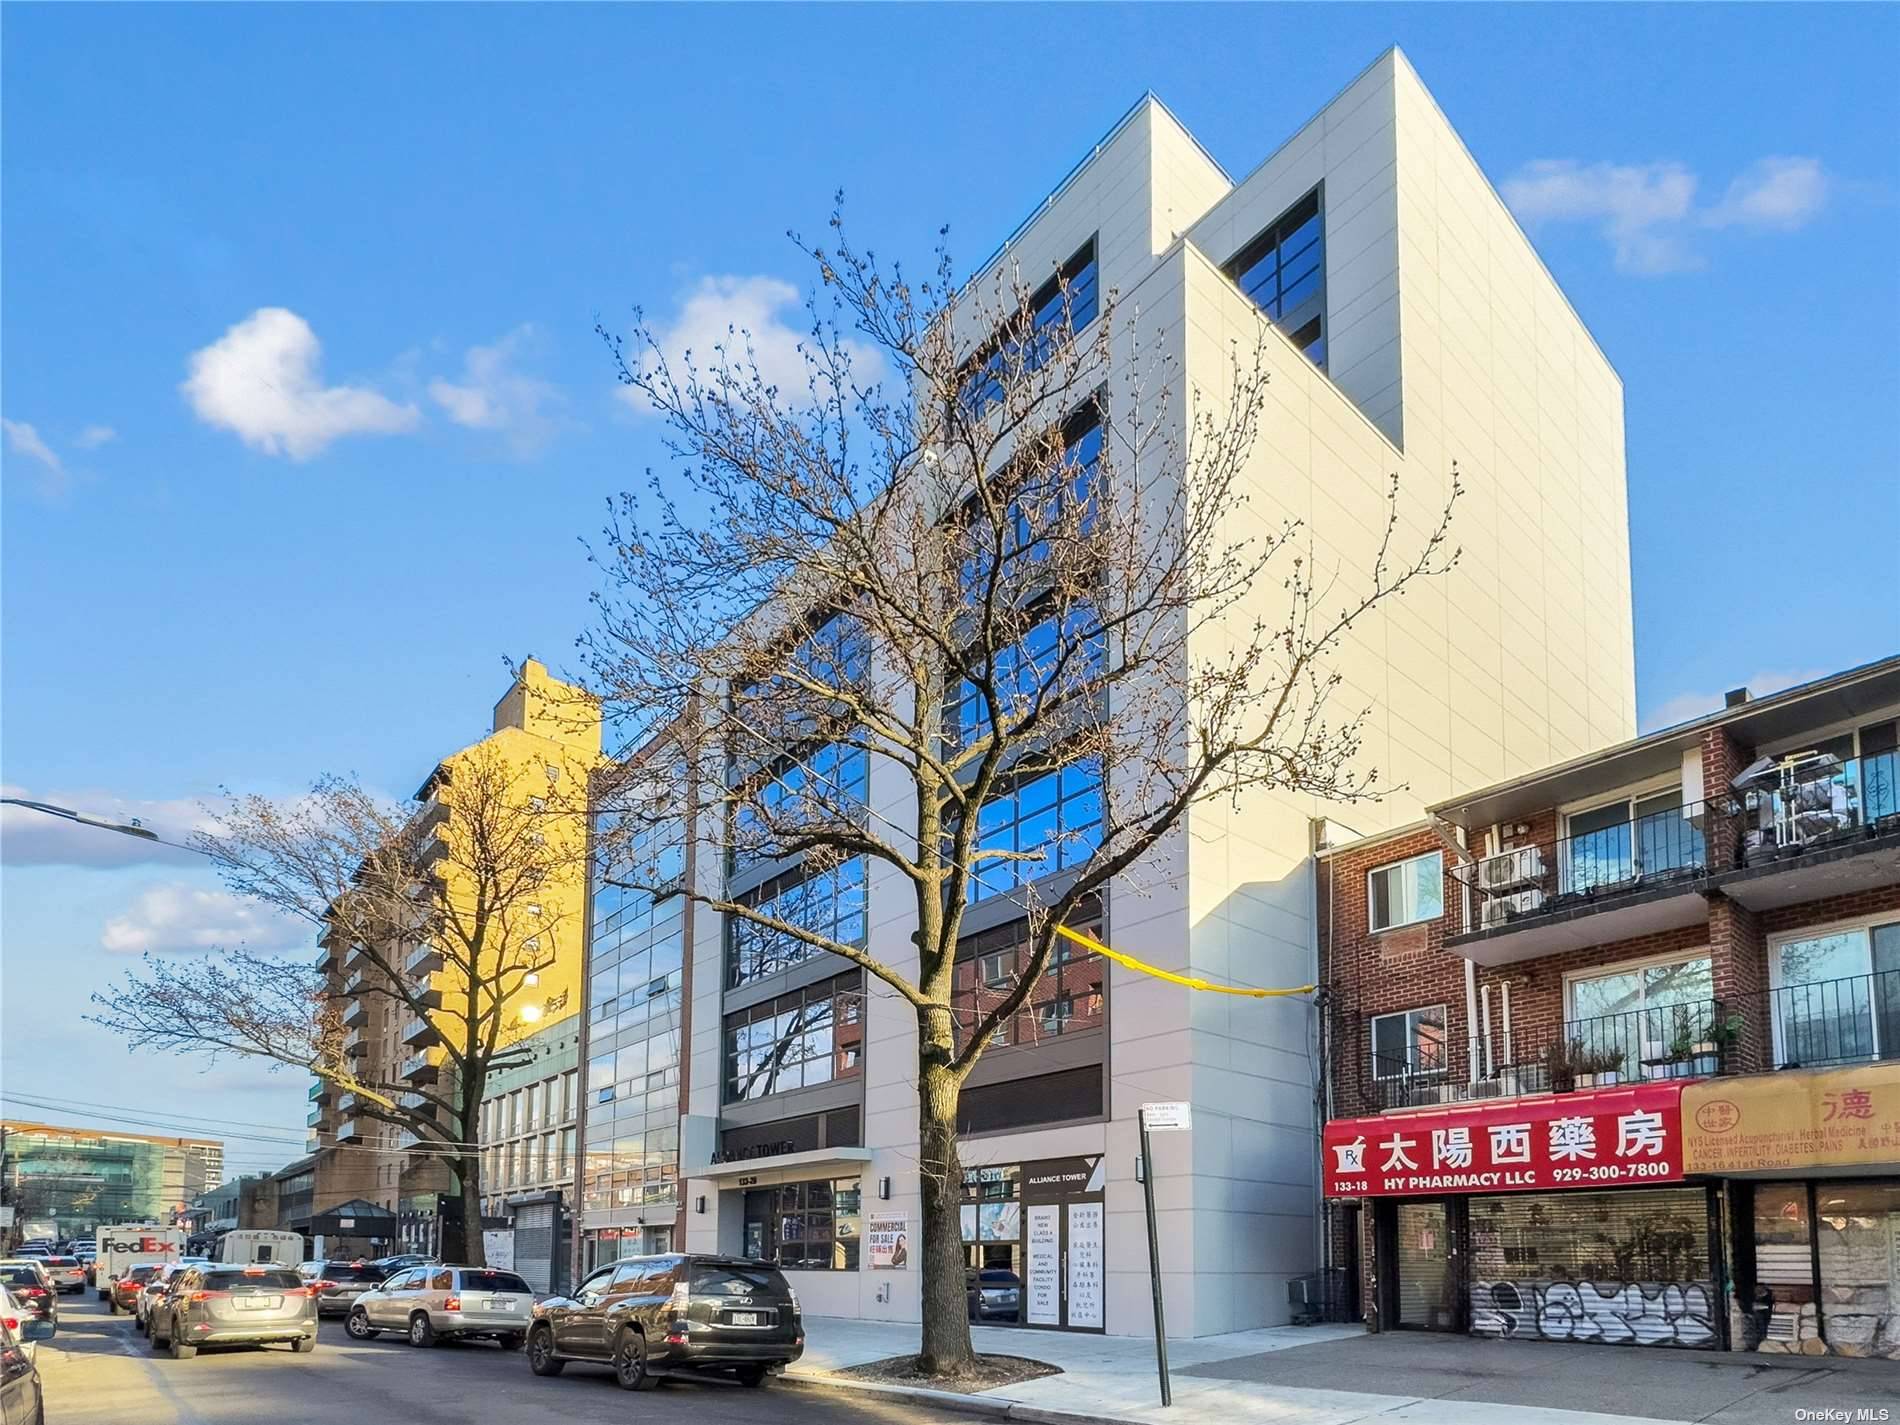 Welcome to Alliance Tower, an impressive Class A office building located at a prime location in the heart of Flushing, complete with a 25 year ICAP tax abatement and easy ...